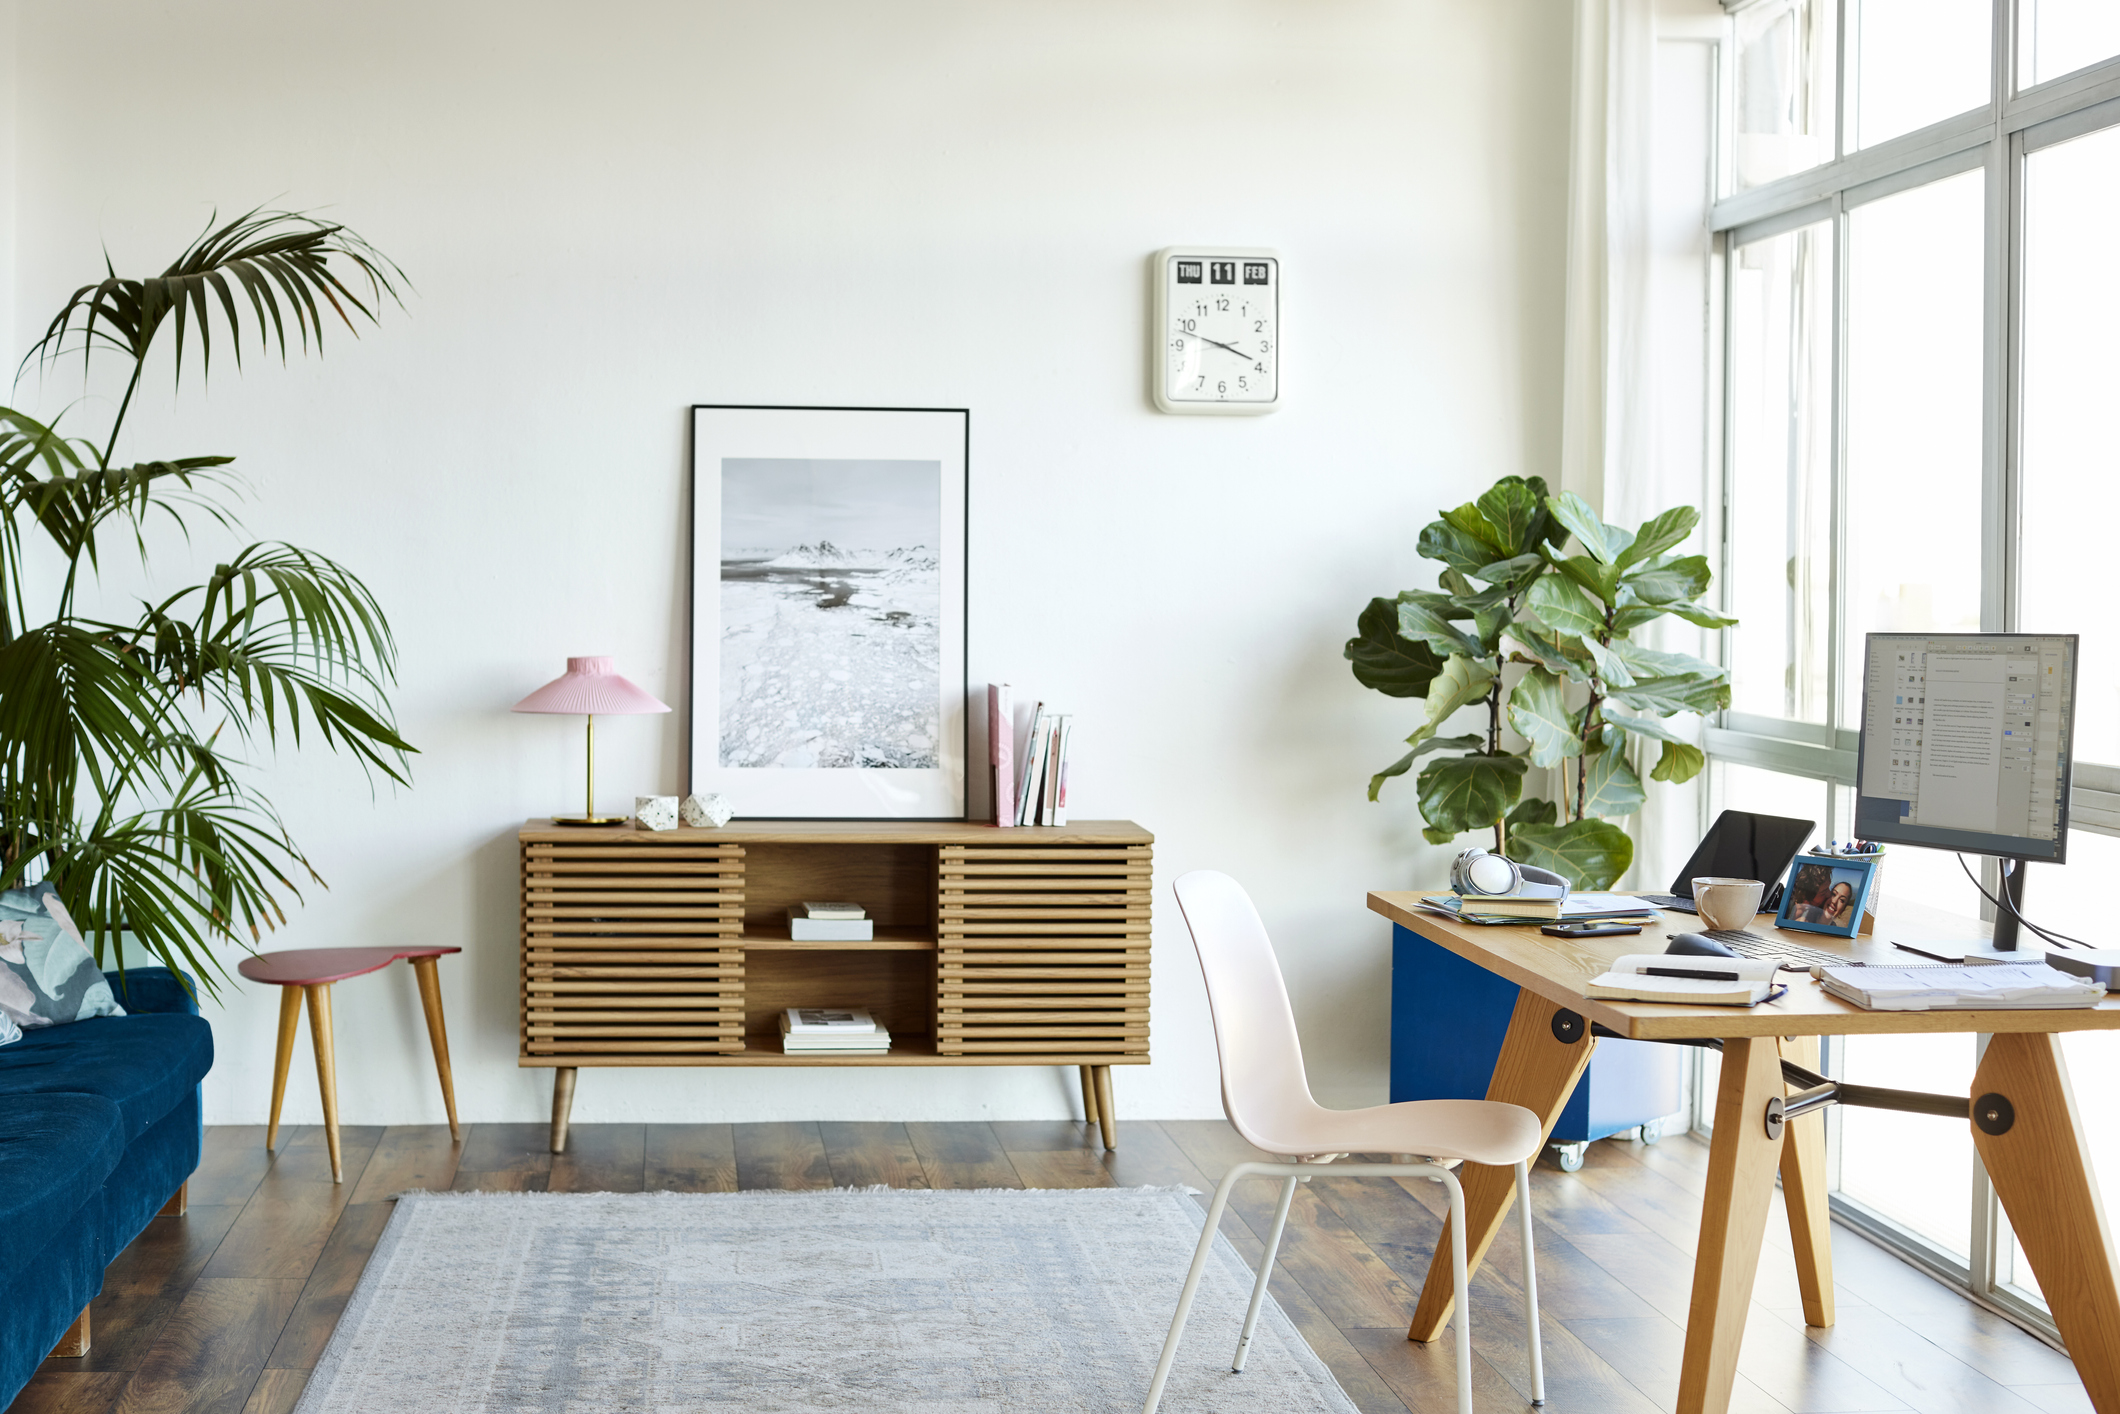 Top Trends and Tips For Styling Your Workspace